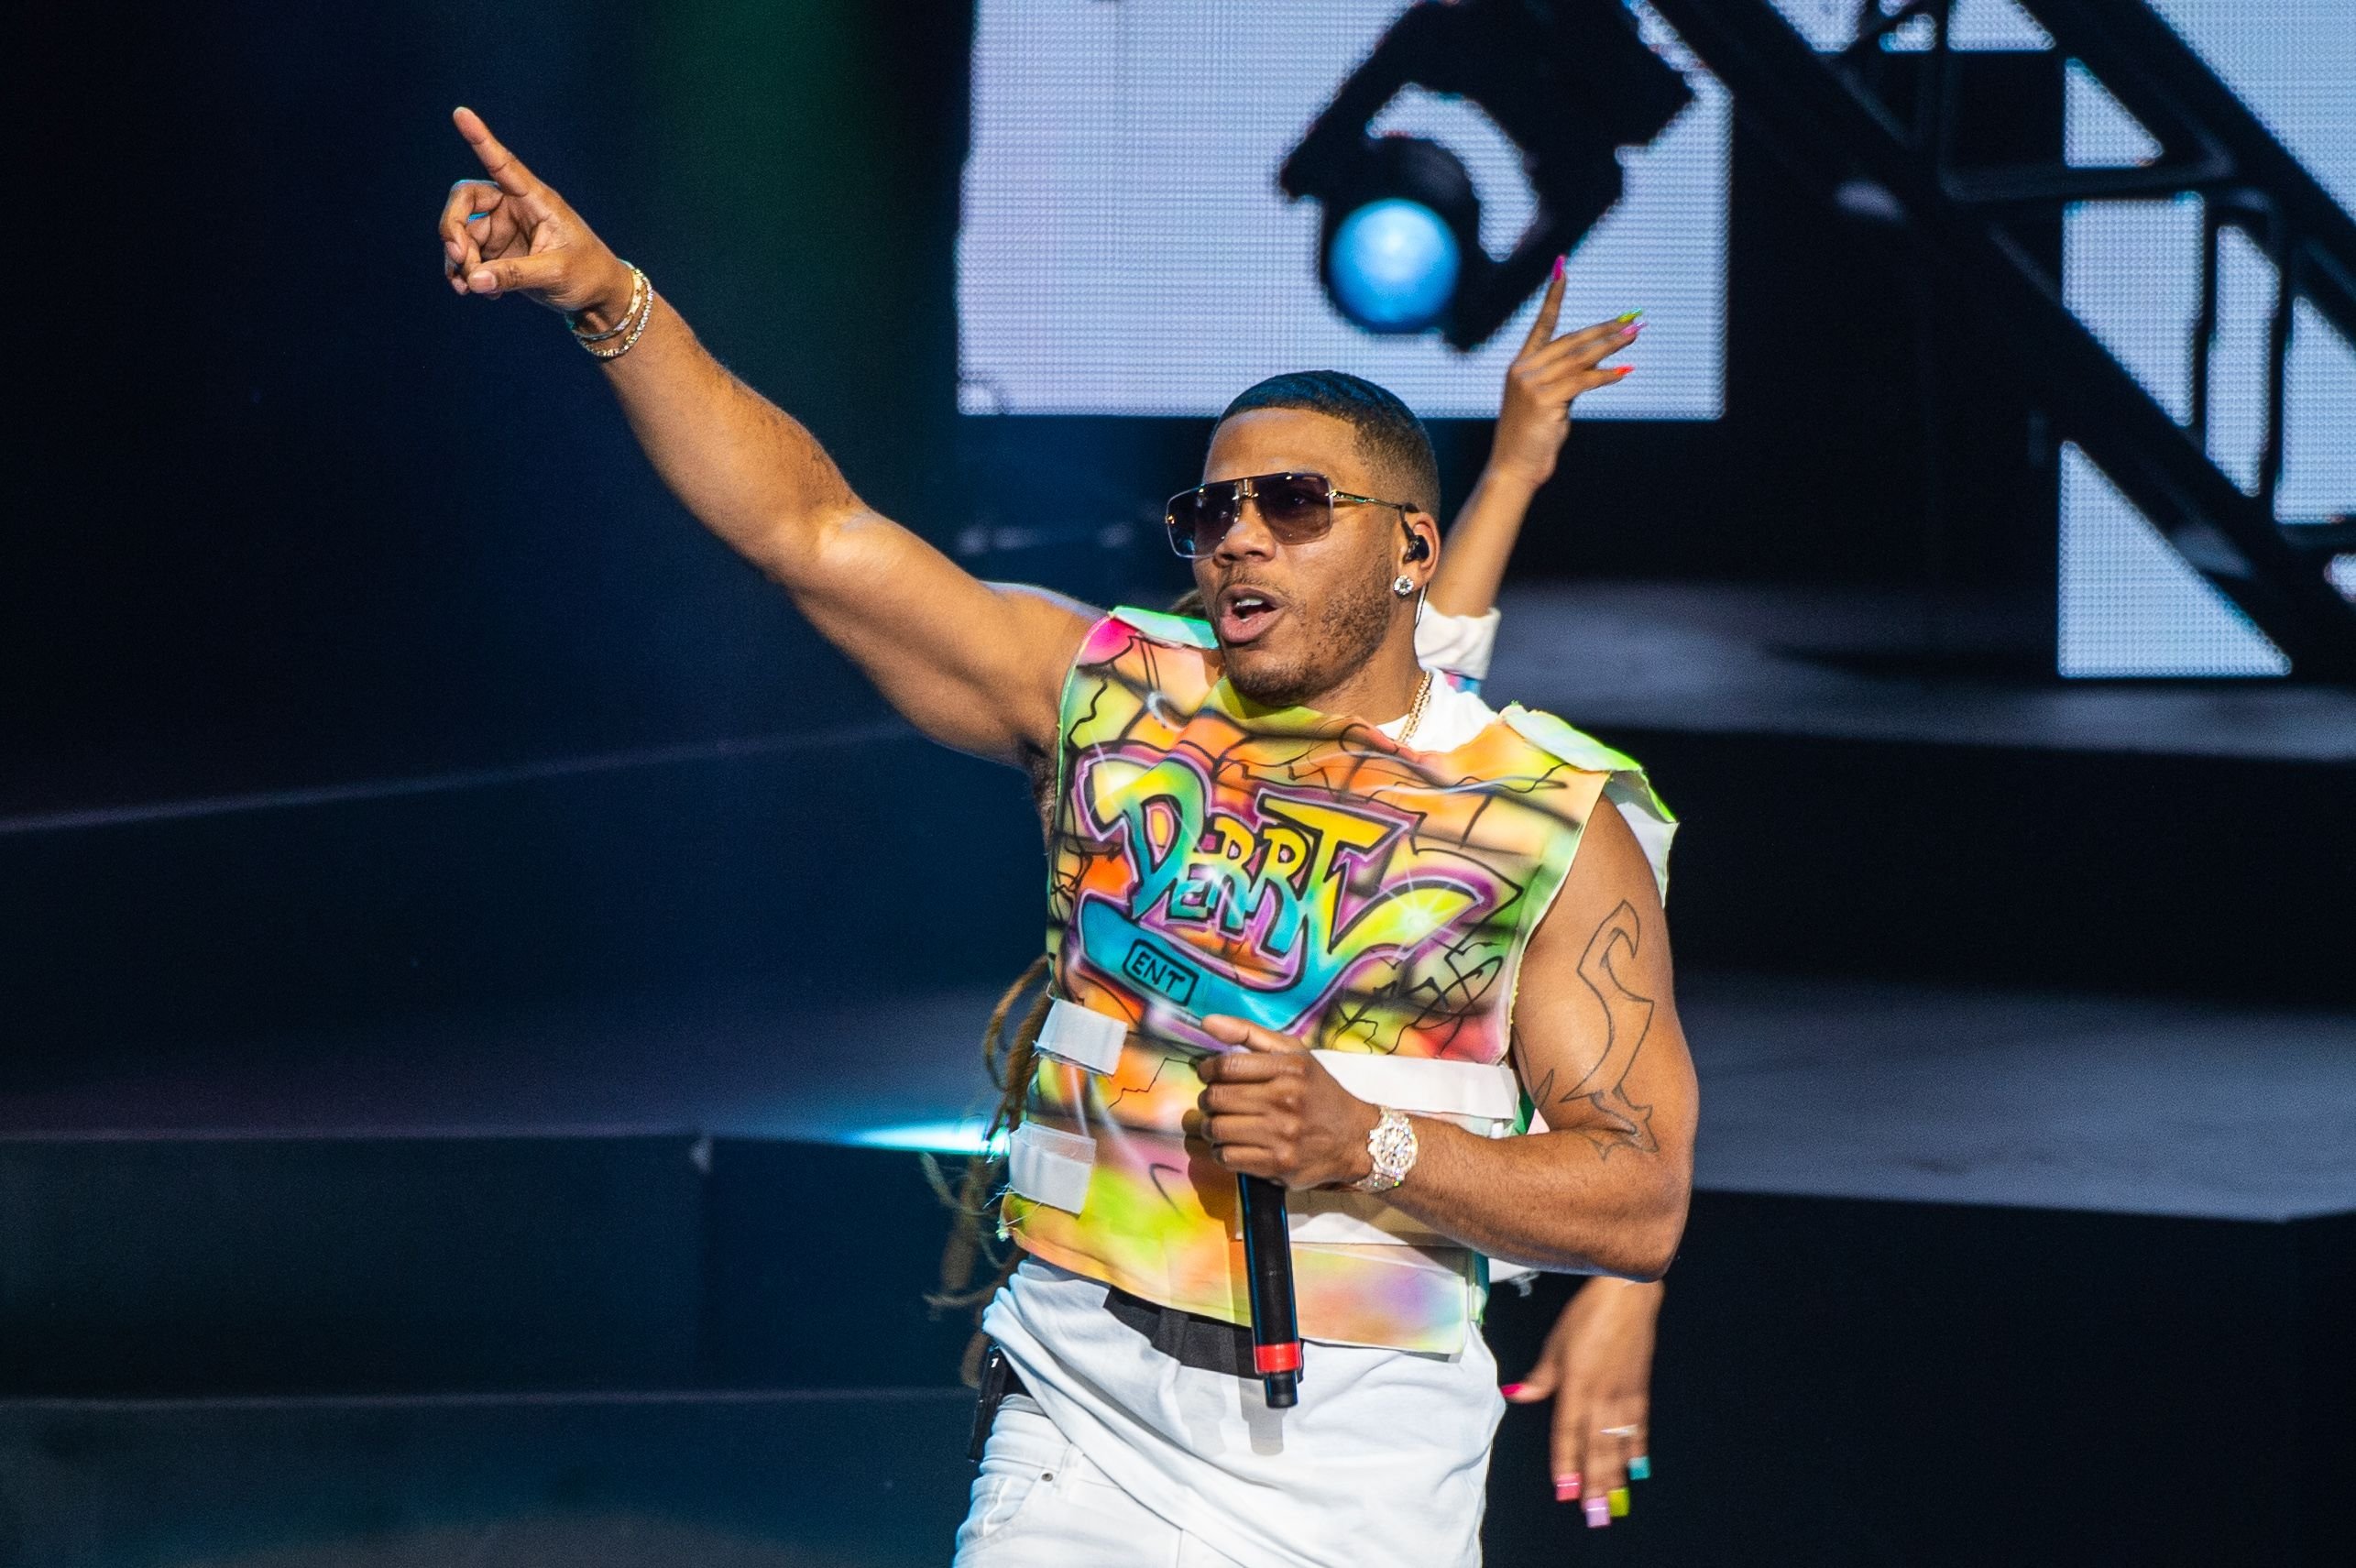 Rapper Nelly on the stage at DTE Energy Music Theater on August 17, 2019 in Clarkston. | Photo: Getty Images